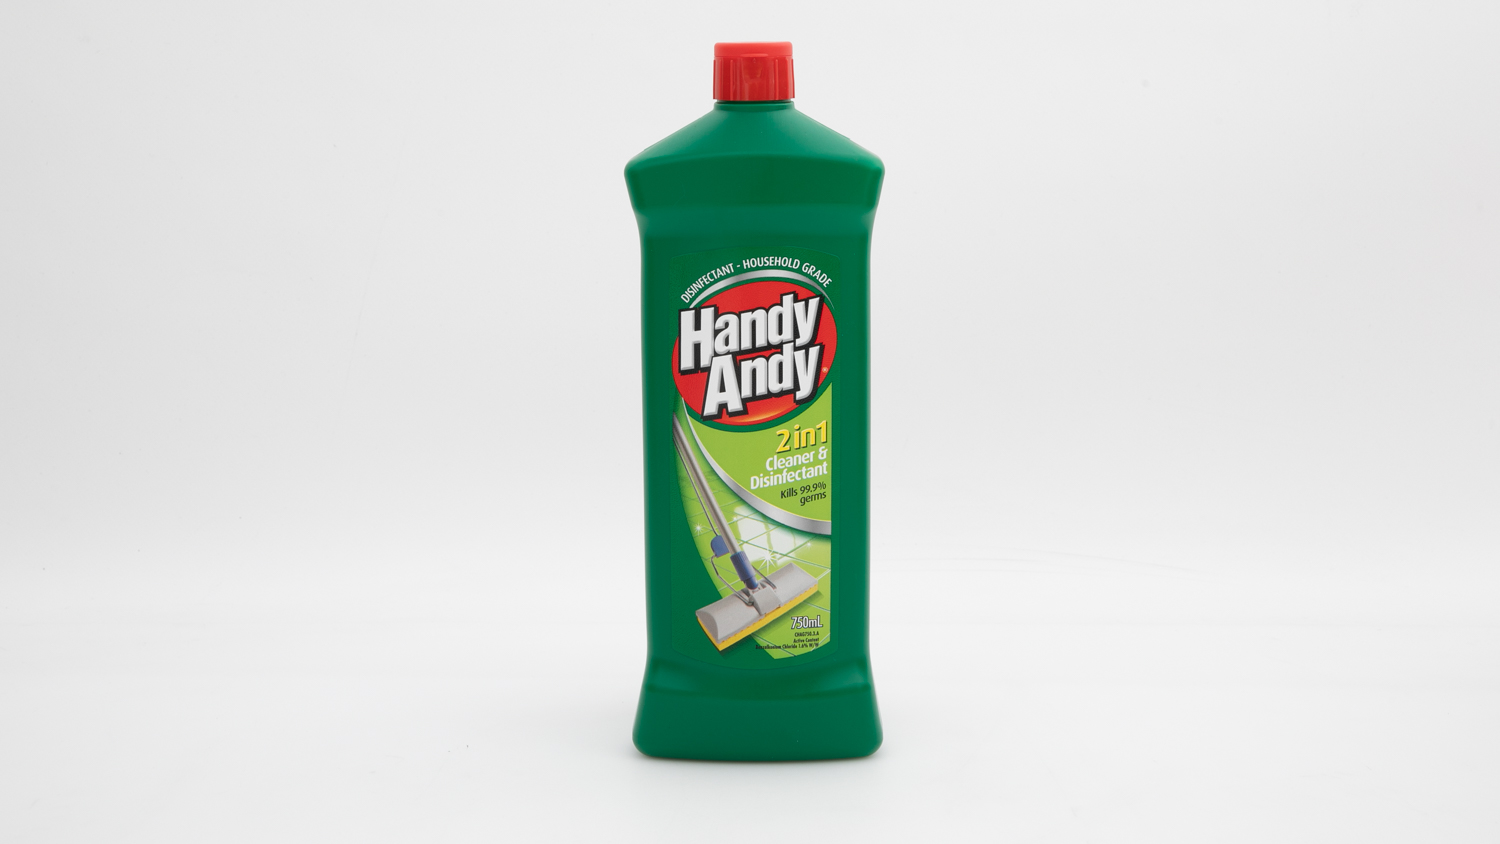 Handy Andy 2 in 1 Cleaner & Disinfectant carousel image